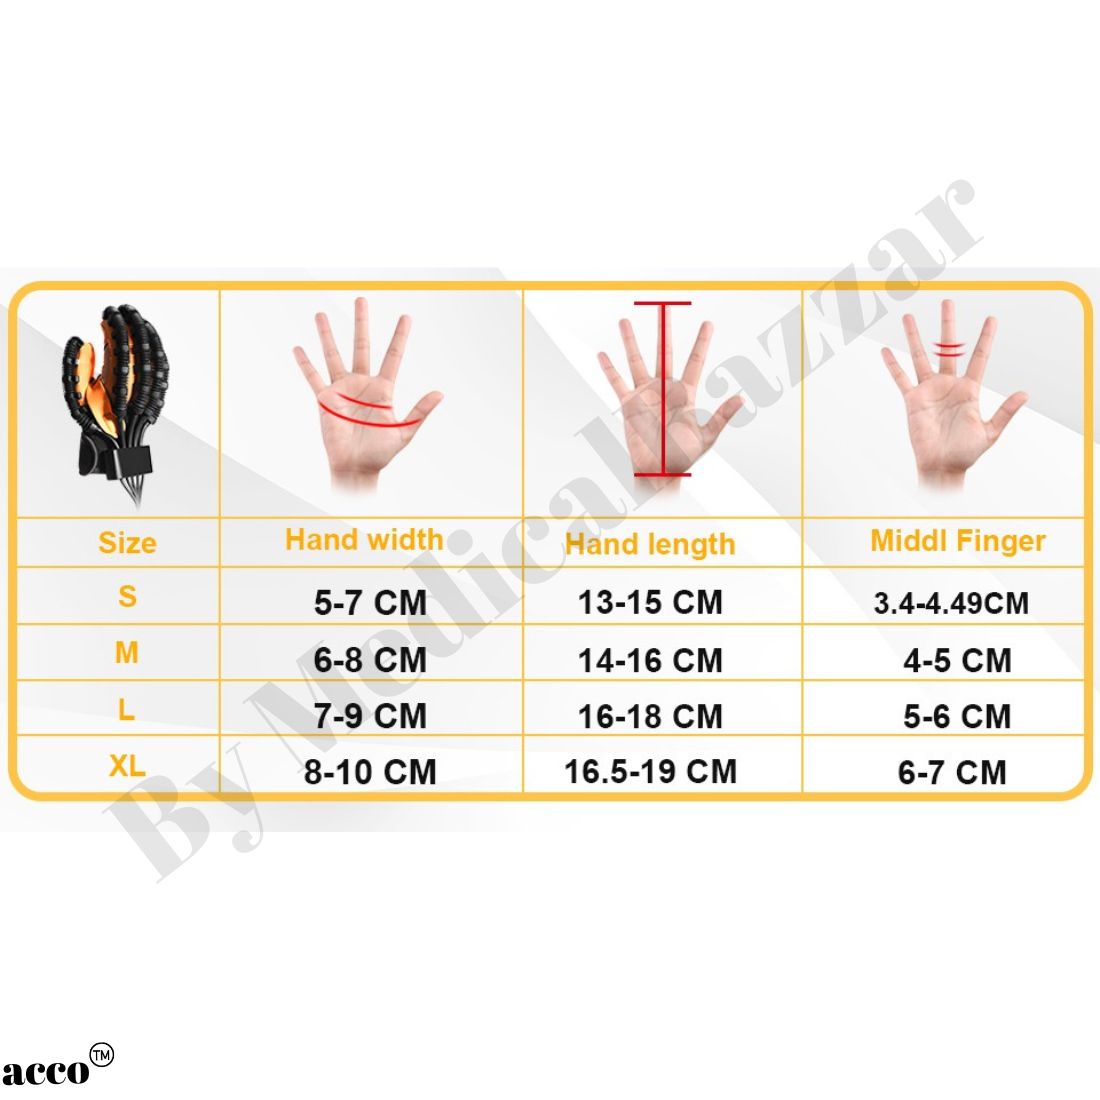 acco Robotic Hand Rehabilitation Gloves MB12 For hand Stroke and Paralysis